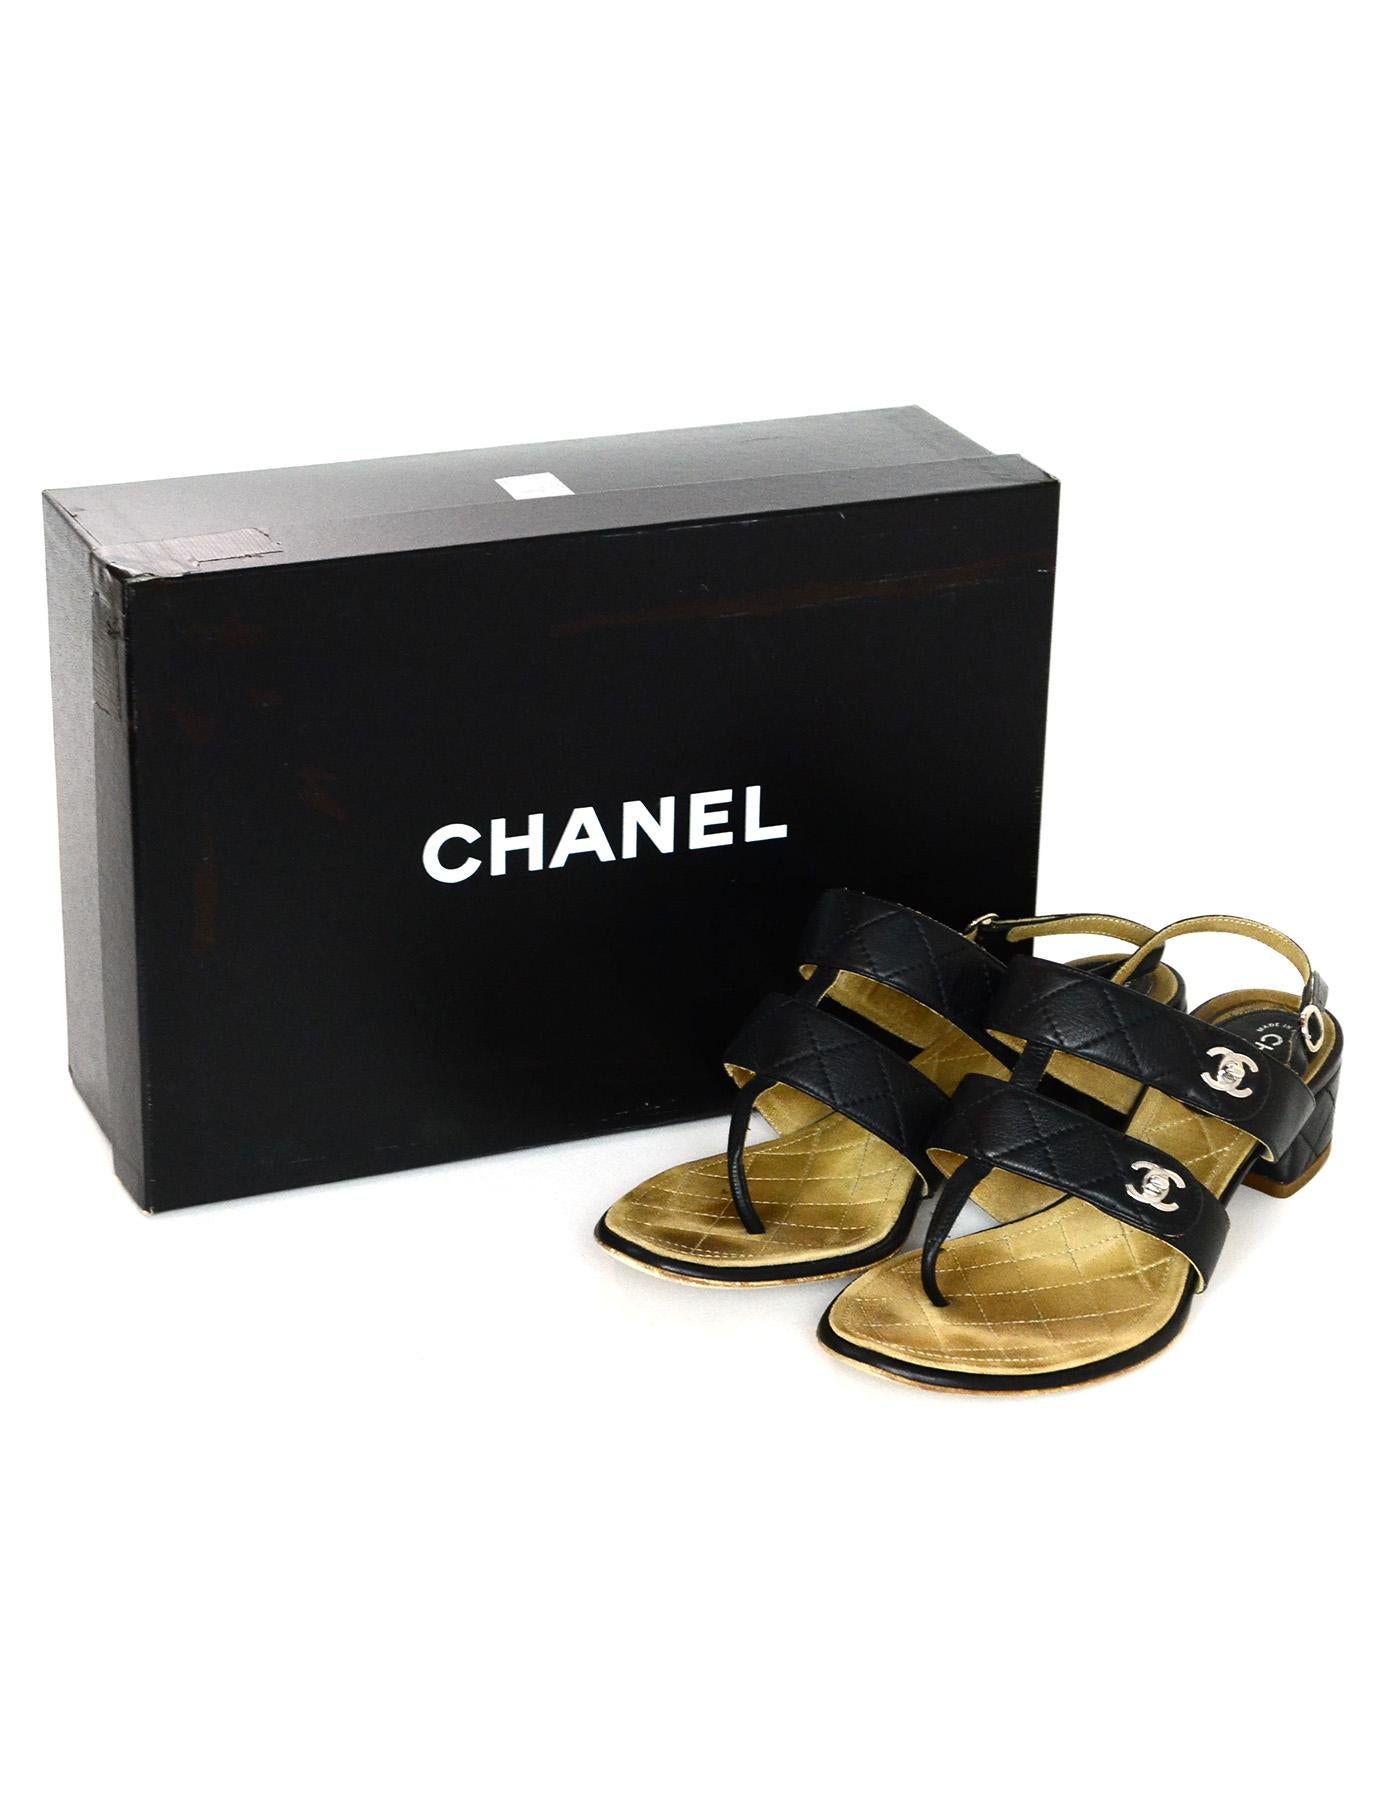 Chanel Black Calfskin Quilted CC Turnlock Thong Heeled Sandals Sz 38

Made In: Italy
Year of Production: 2011
Color: Black
Hardware: Silvertone
Materials: Calfskin leather
Closure/Opening: Sling back with adjustable buckle closure
Overall Condition: